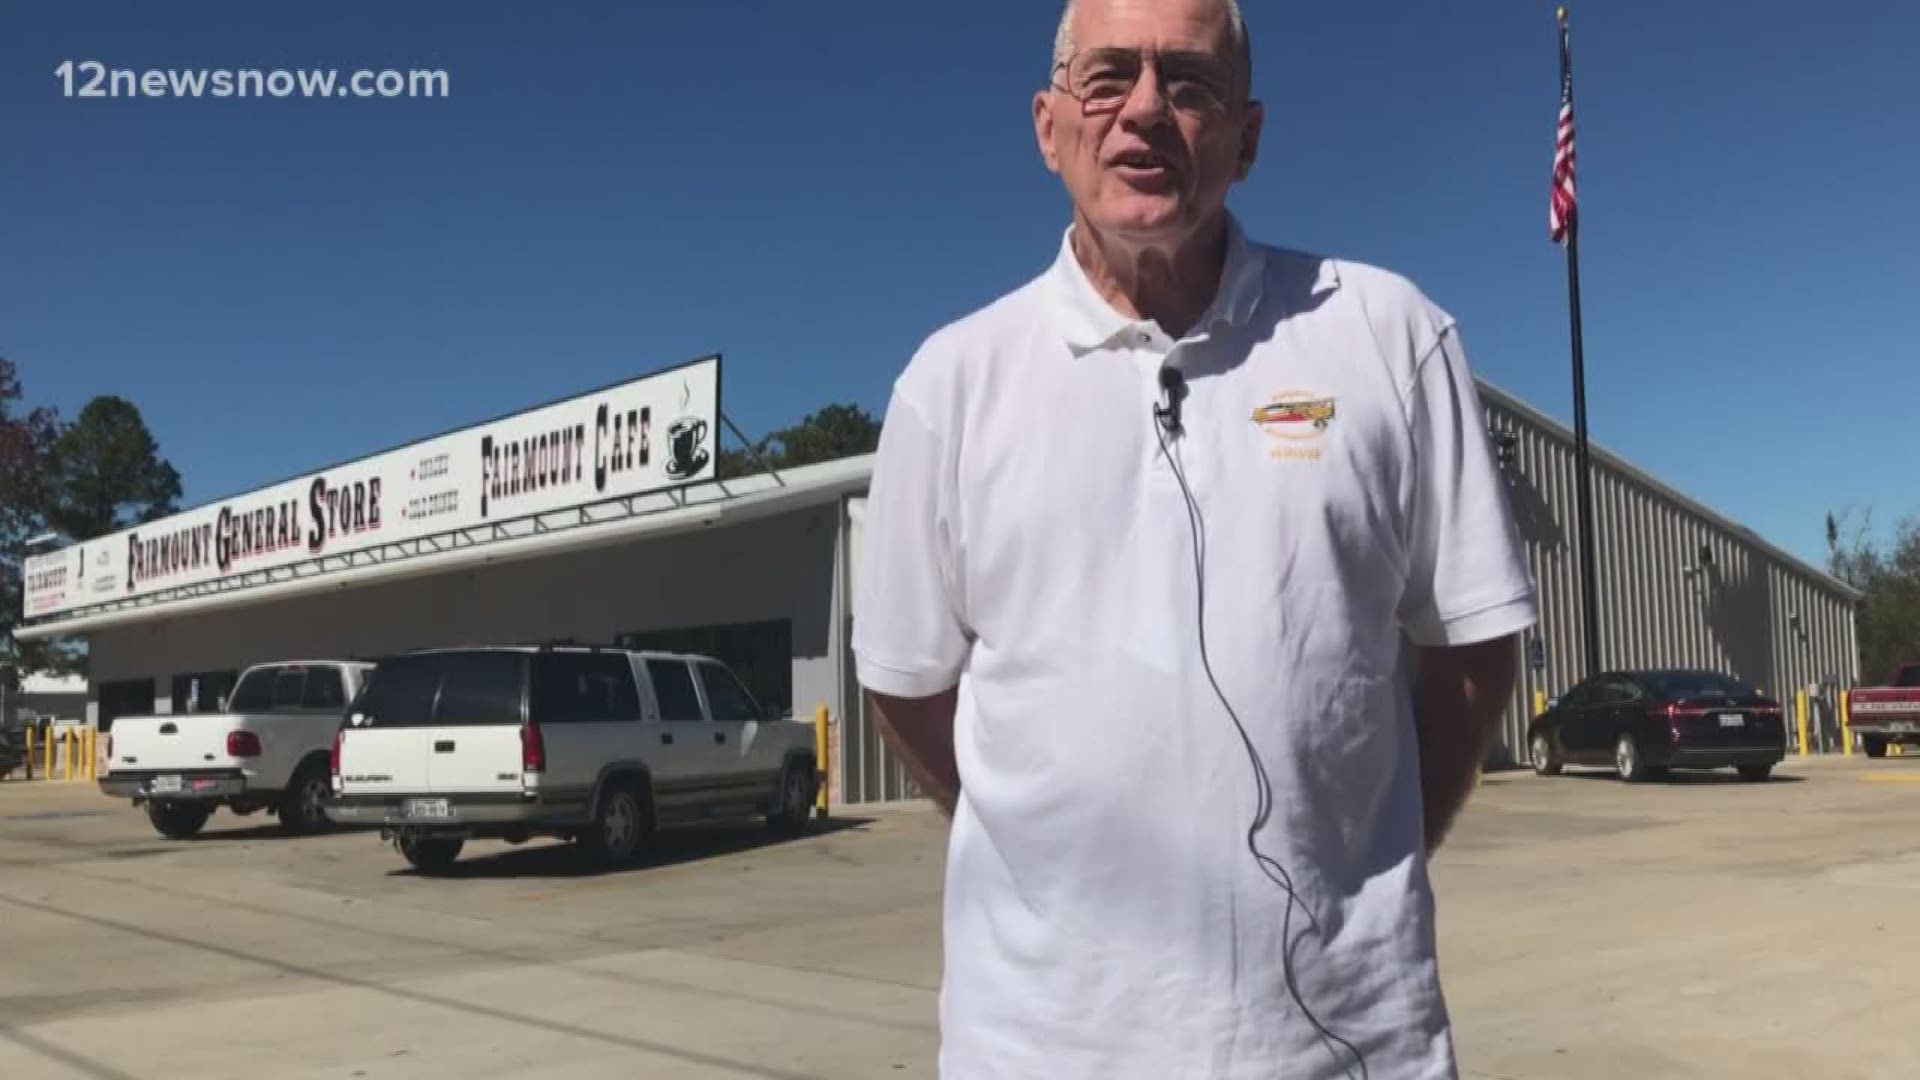 Jim Moyer and his team of investors are hoping to boost the economy in Sabine County by spending their fortunes opening businesses and an airport in Fairmount.